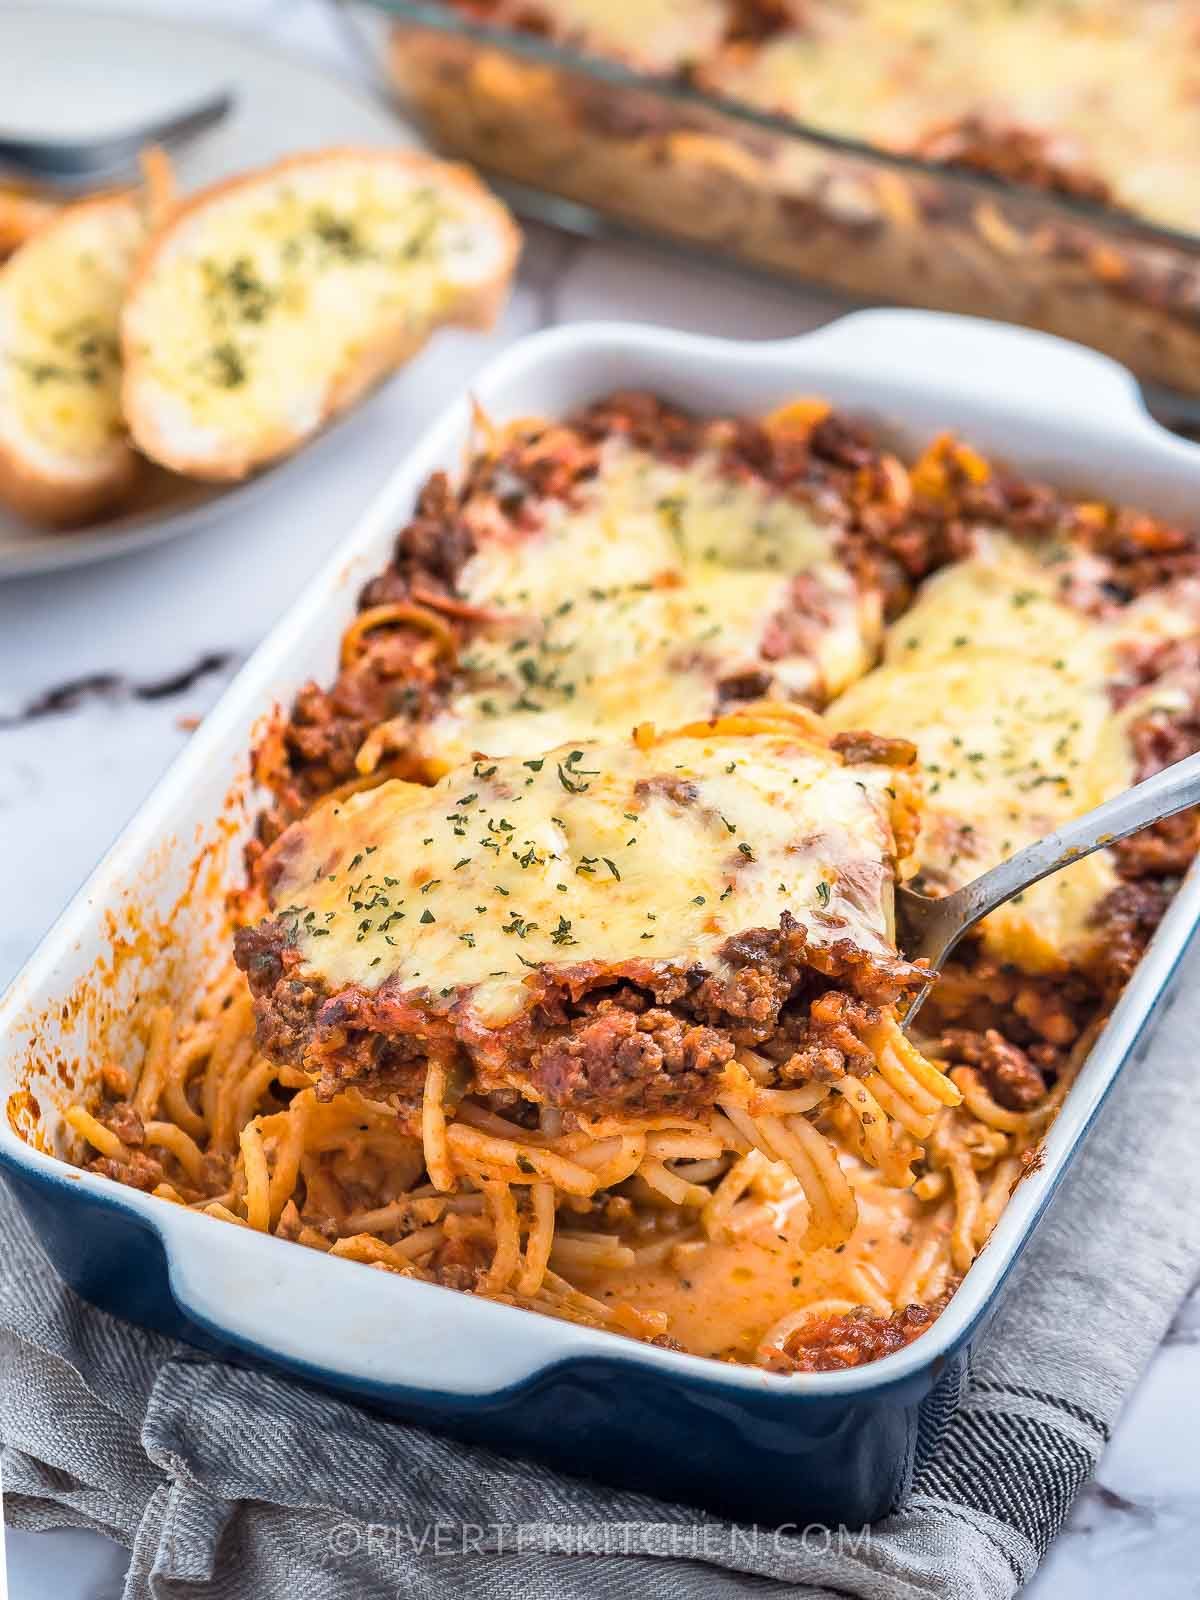 baked spaghetti casserole with cream cheese